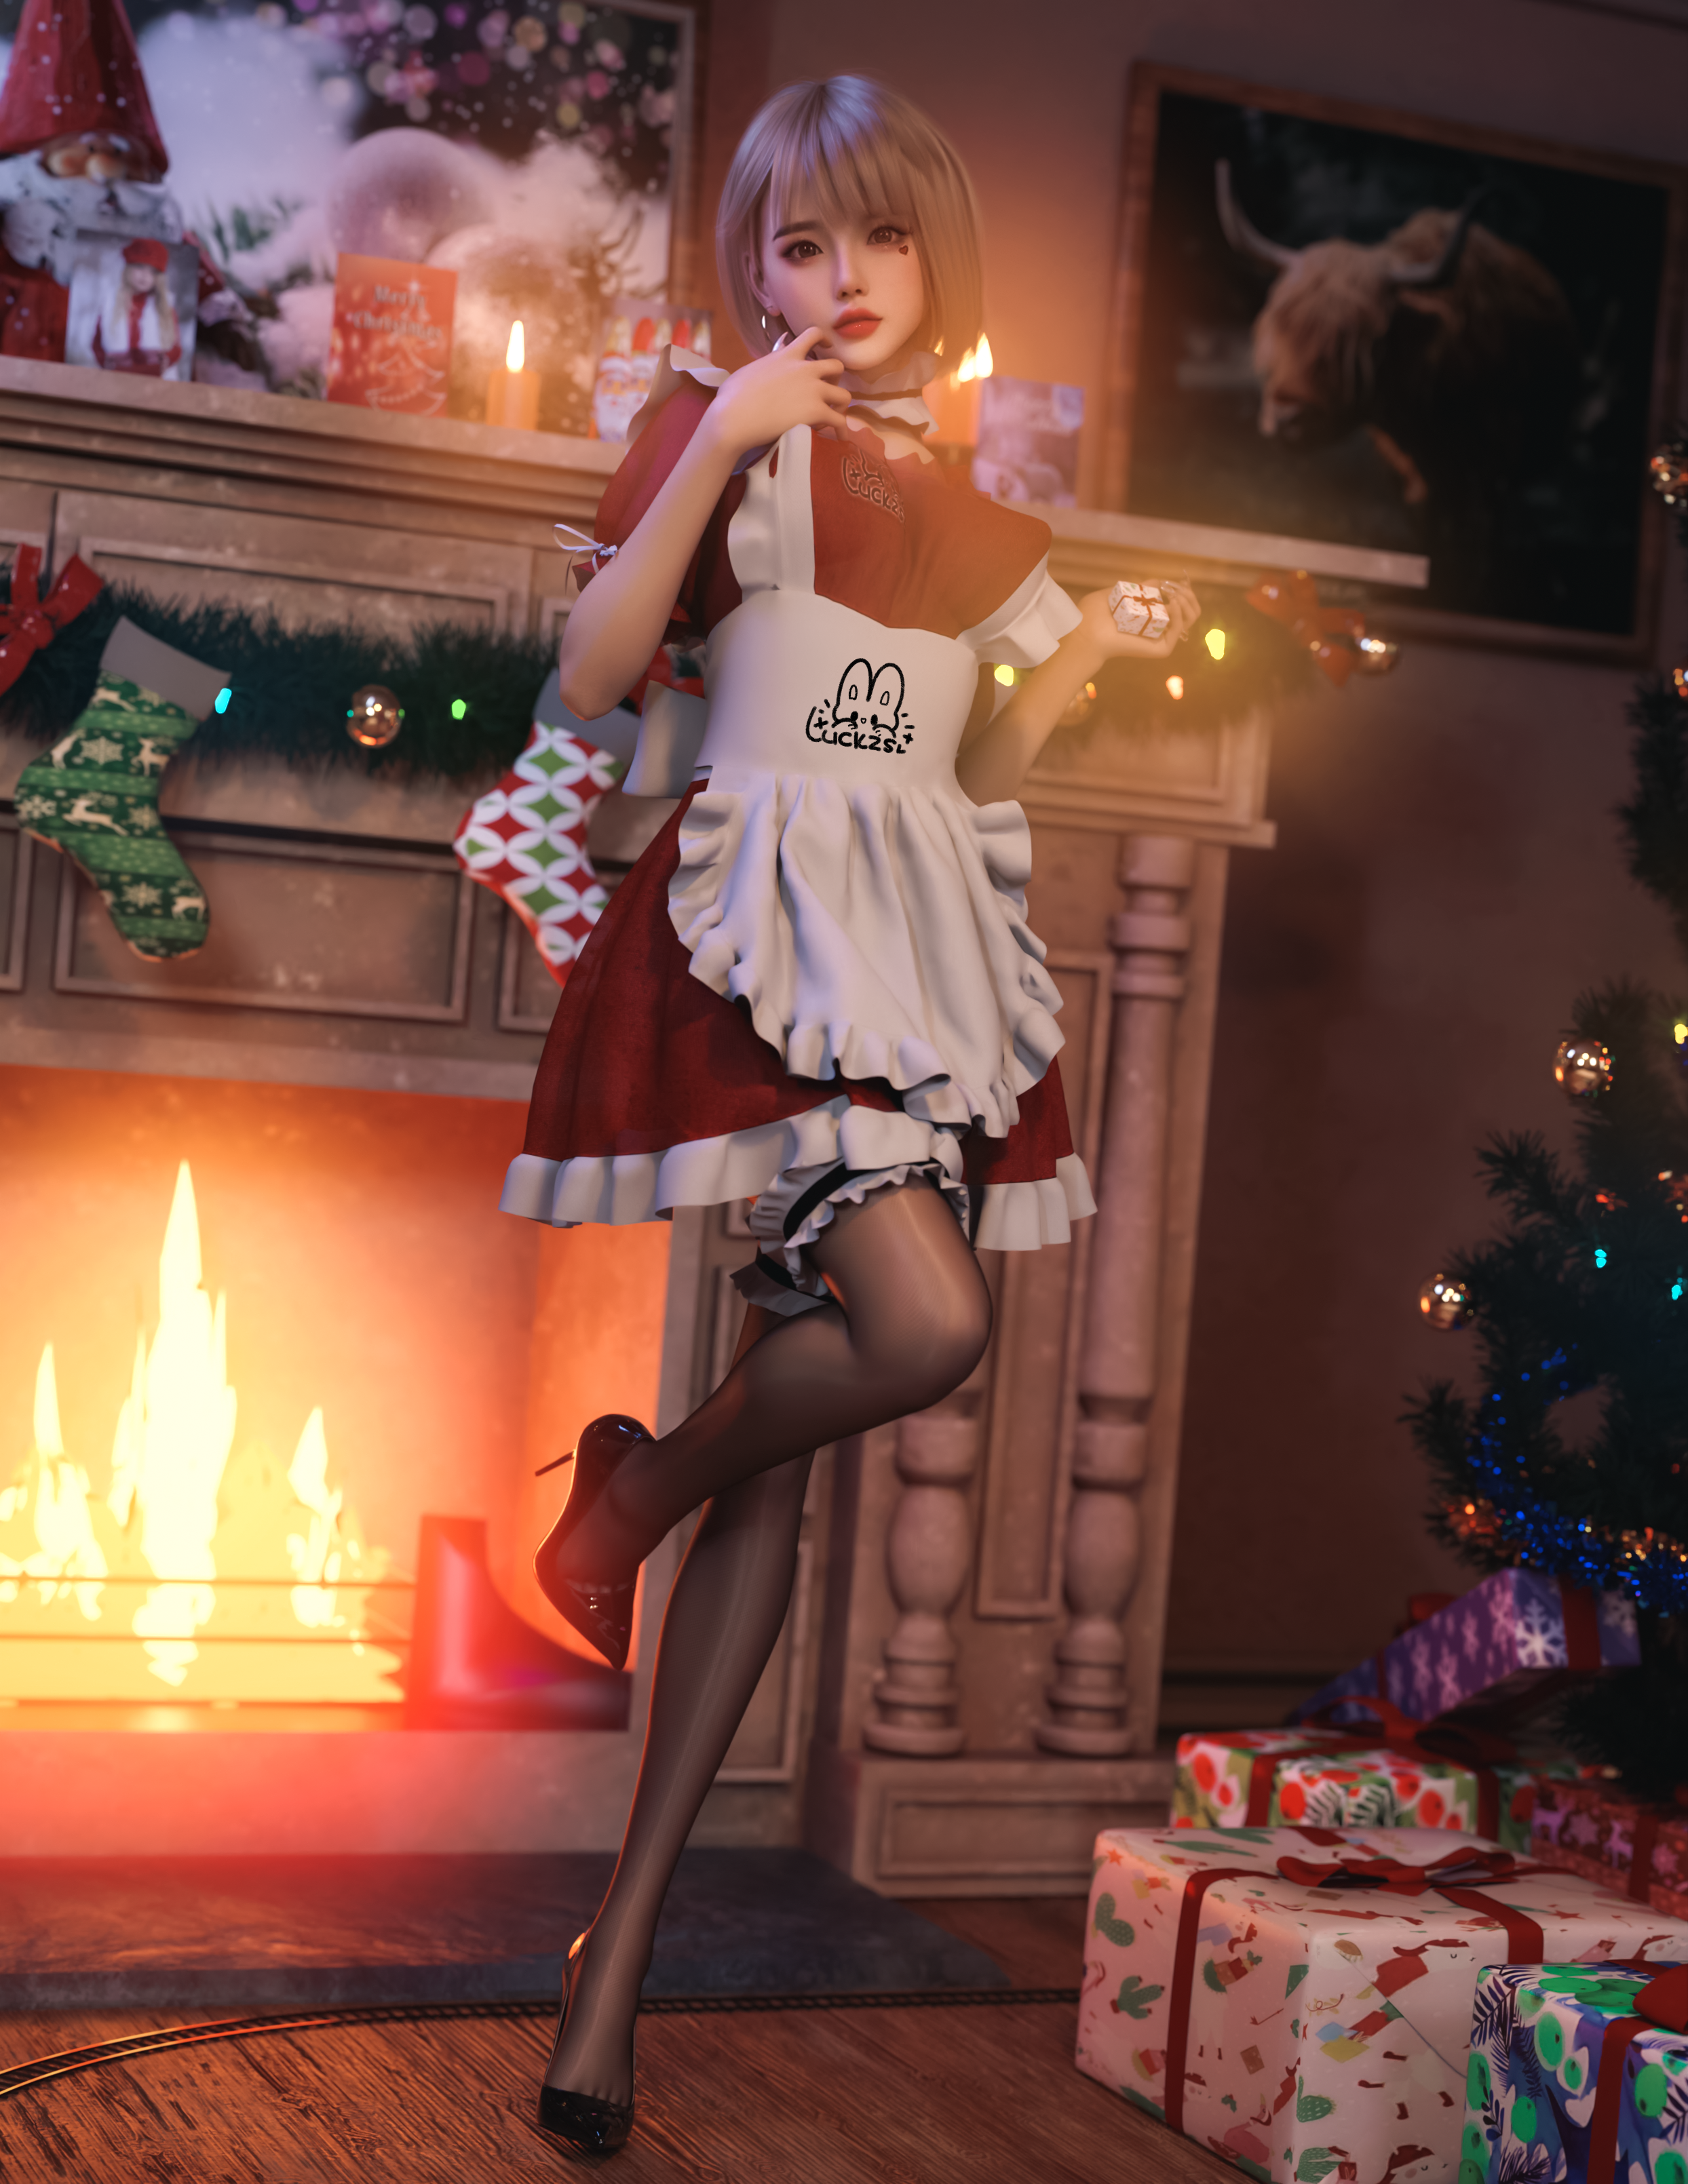 General 2488x3220 Christmas presents Christmas stockings maid maid outfit Christmas ornaments  CGI fireplace Luck zs digital art portrait display indoors women indoors looking at viewer standing Christmas tree socks standing on one leg fire